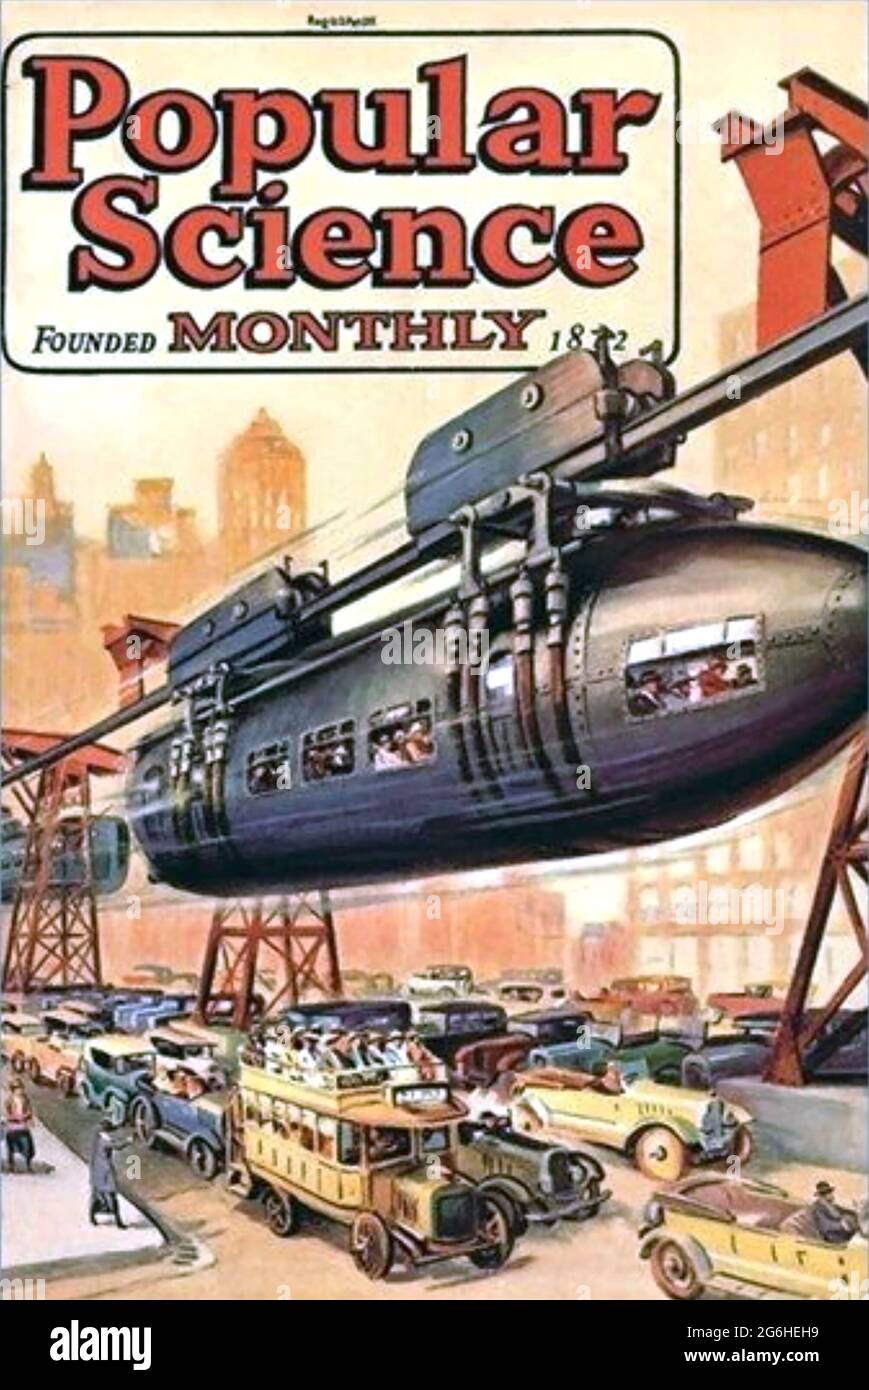 POPULAR SCIENCE  An American quarterly magazine, first published in 1872. Cover from about 1910 showing a monorail beating the traffic jam Stock Photo